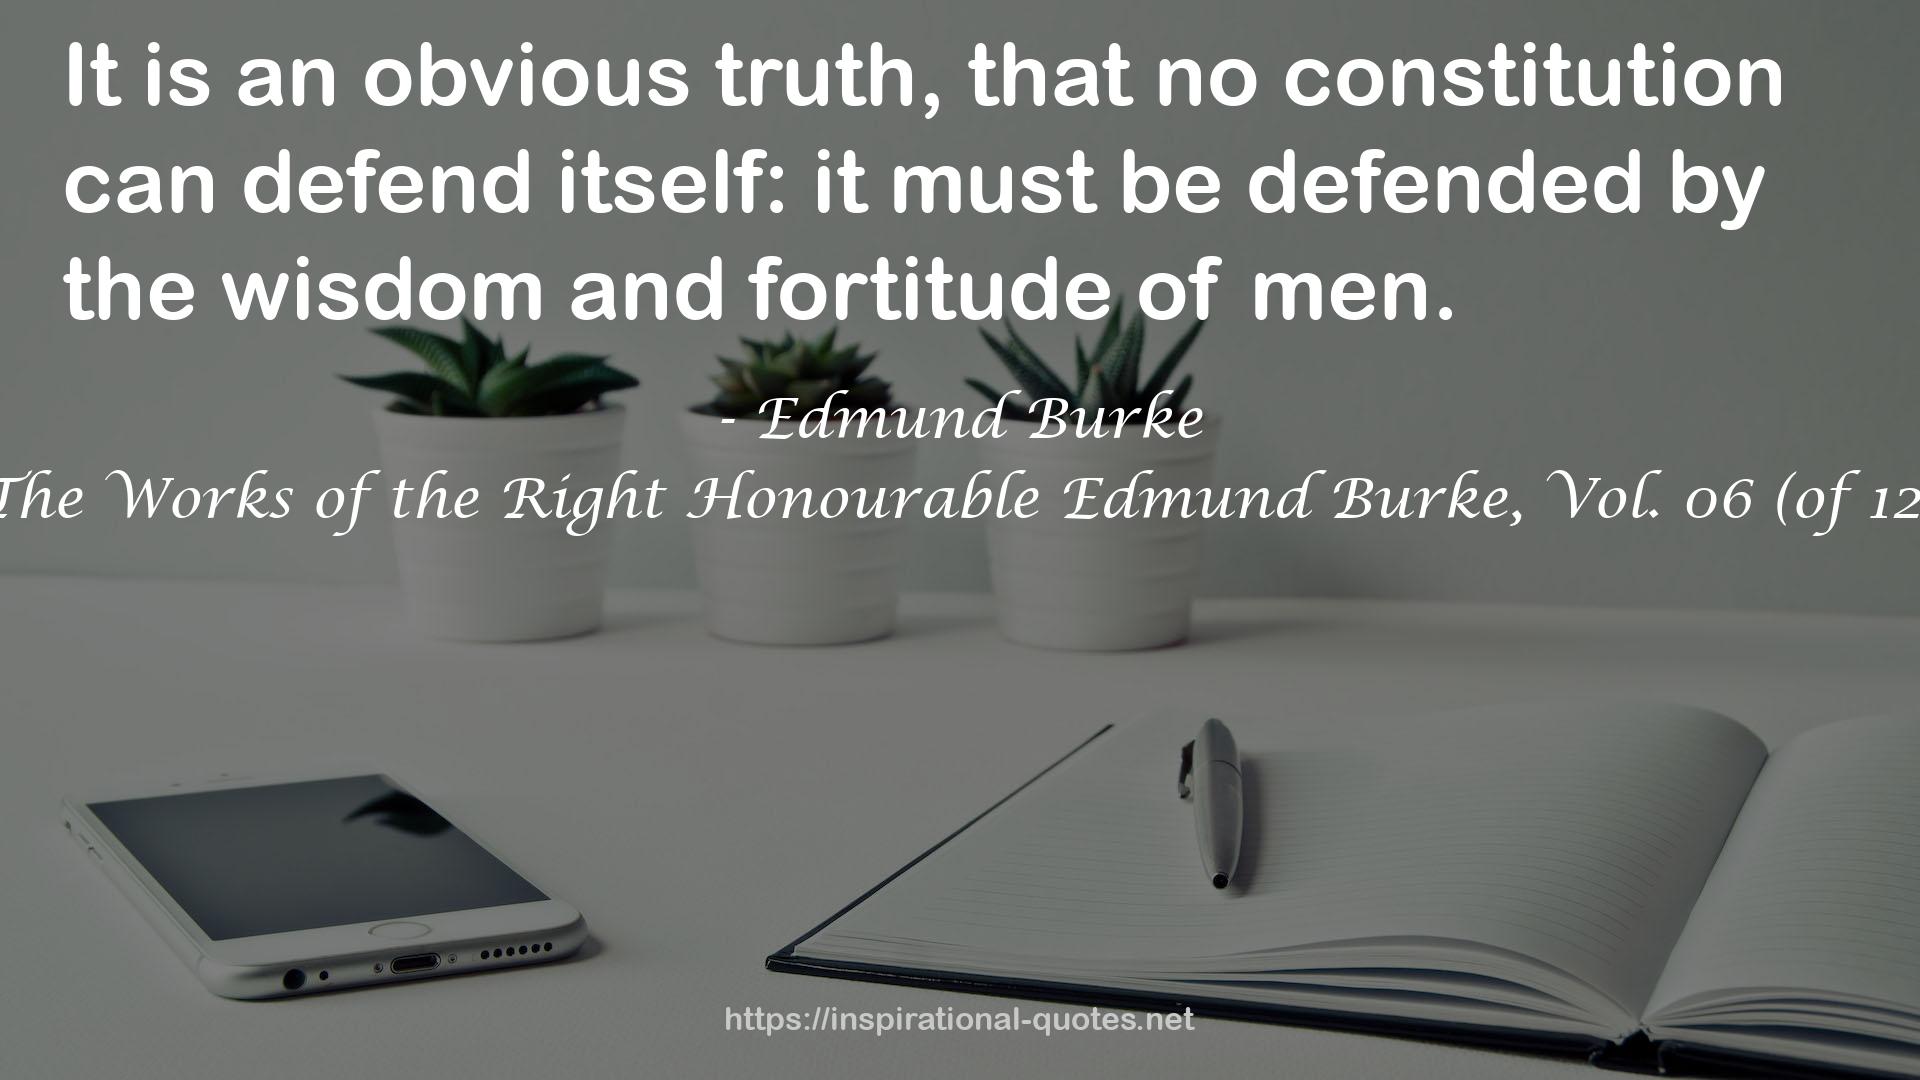 The Works of the Right Honourable Edmund Burke, Vol. 06 (of 12) QUOTES